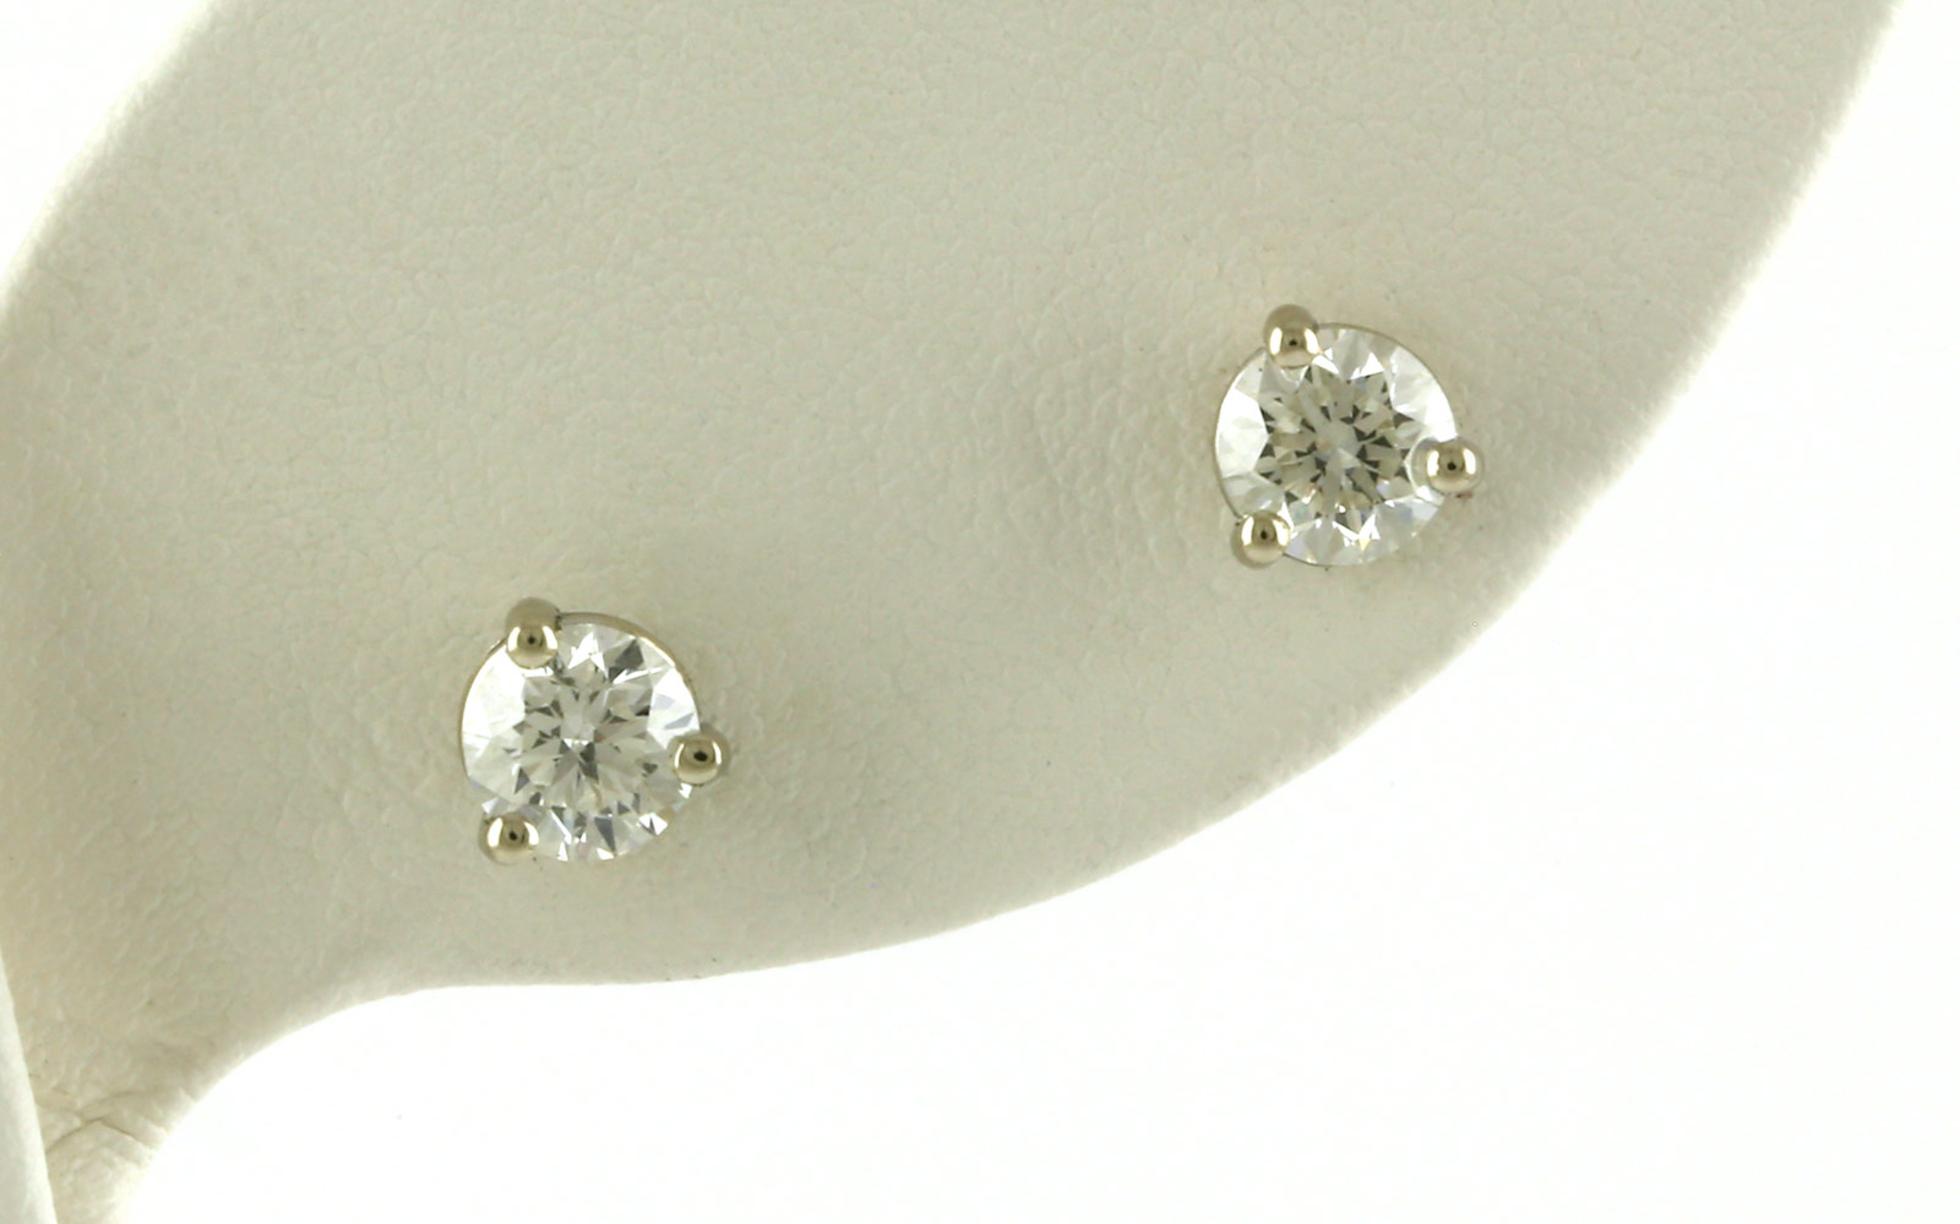 Diamond Stud Earrings in 3-Prong Martini Setting in White Gold (1.48cts TWT)